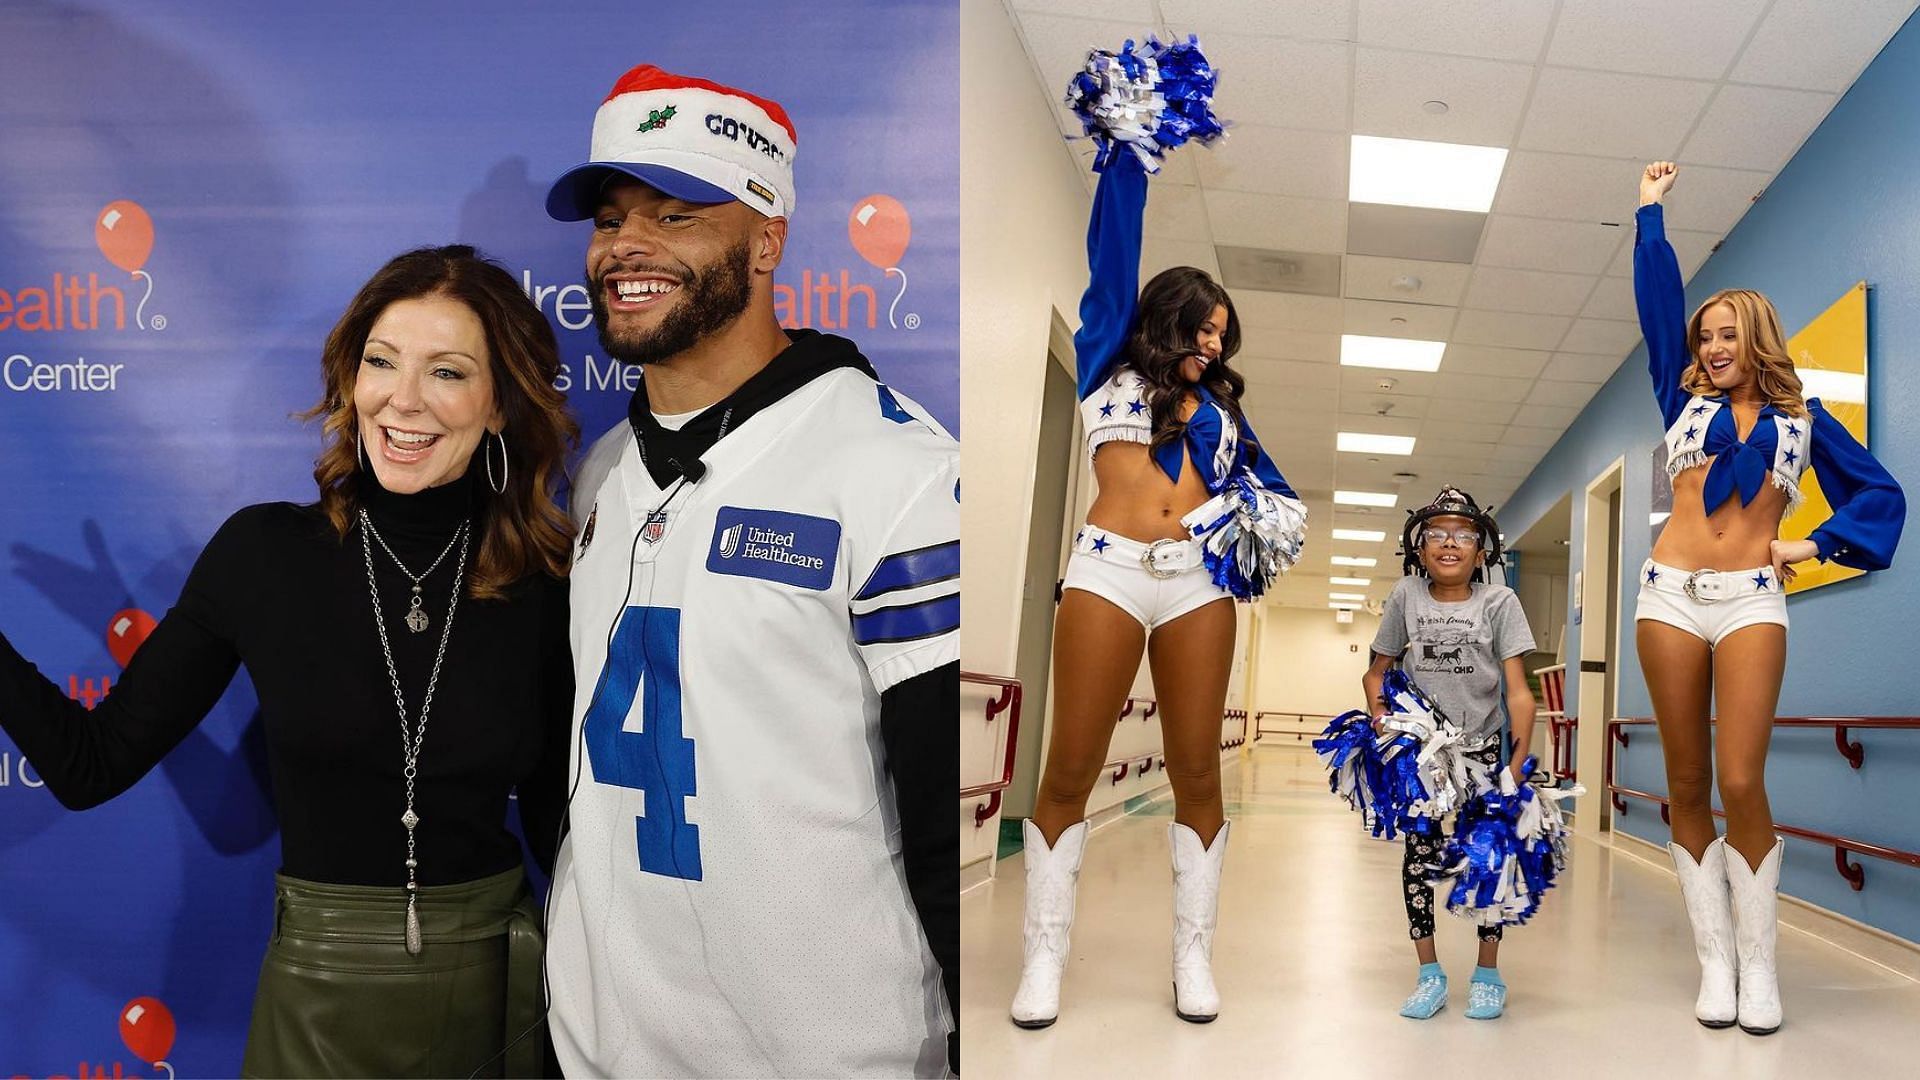 The Dallas Cowboys and their cheerleaders doing outreach